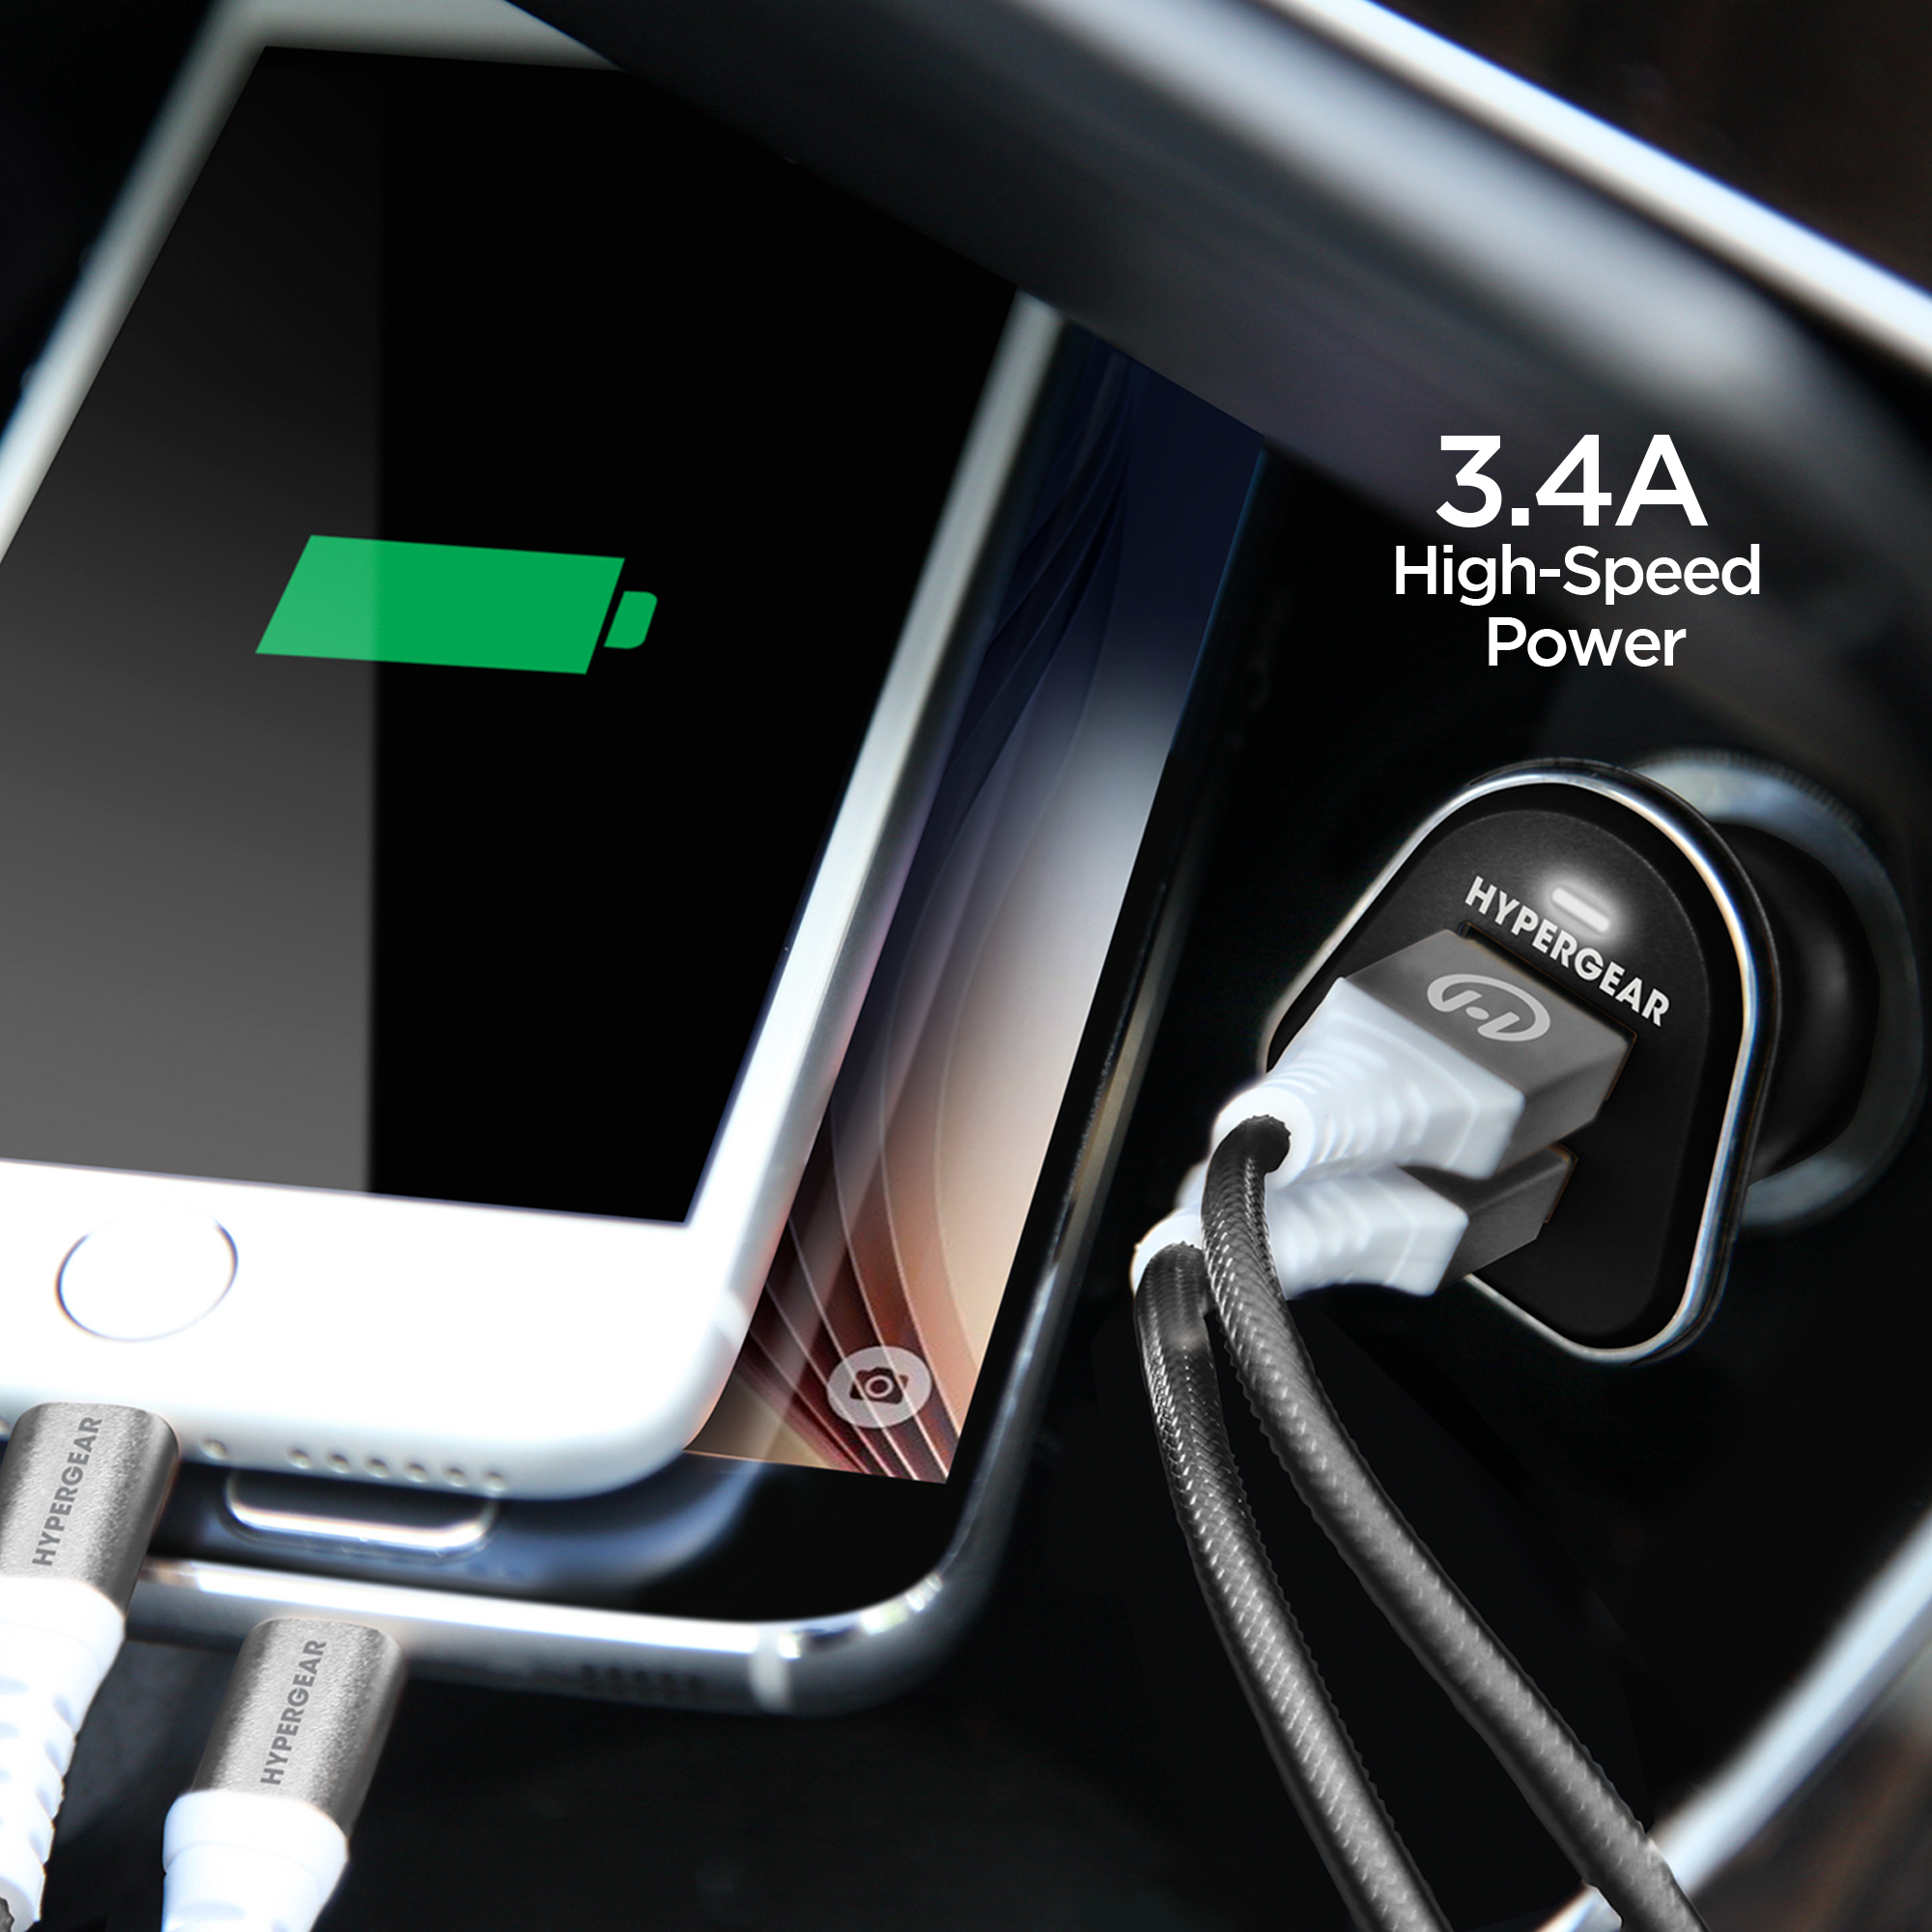 Why Your USB Car Charger Hardly Works At All